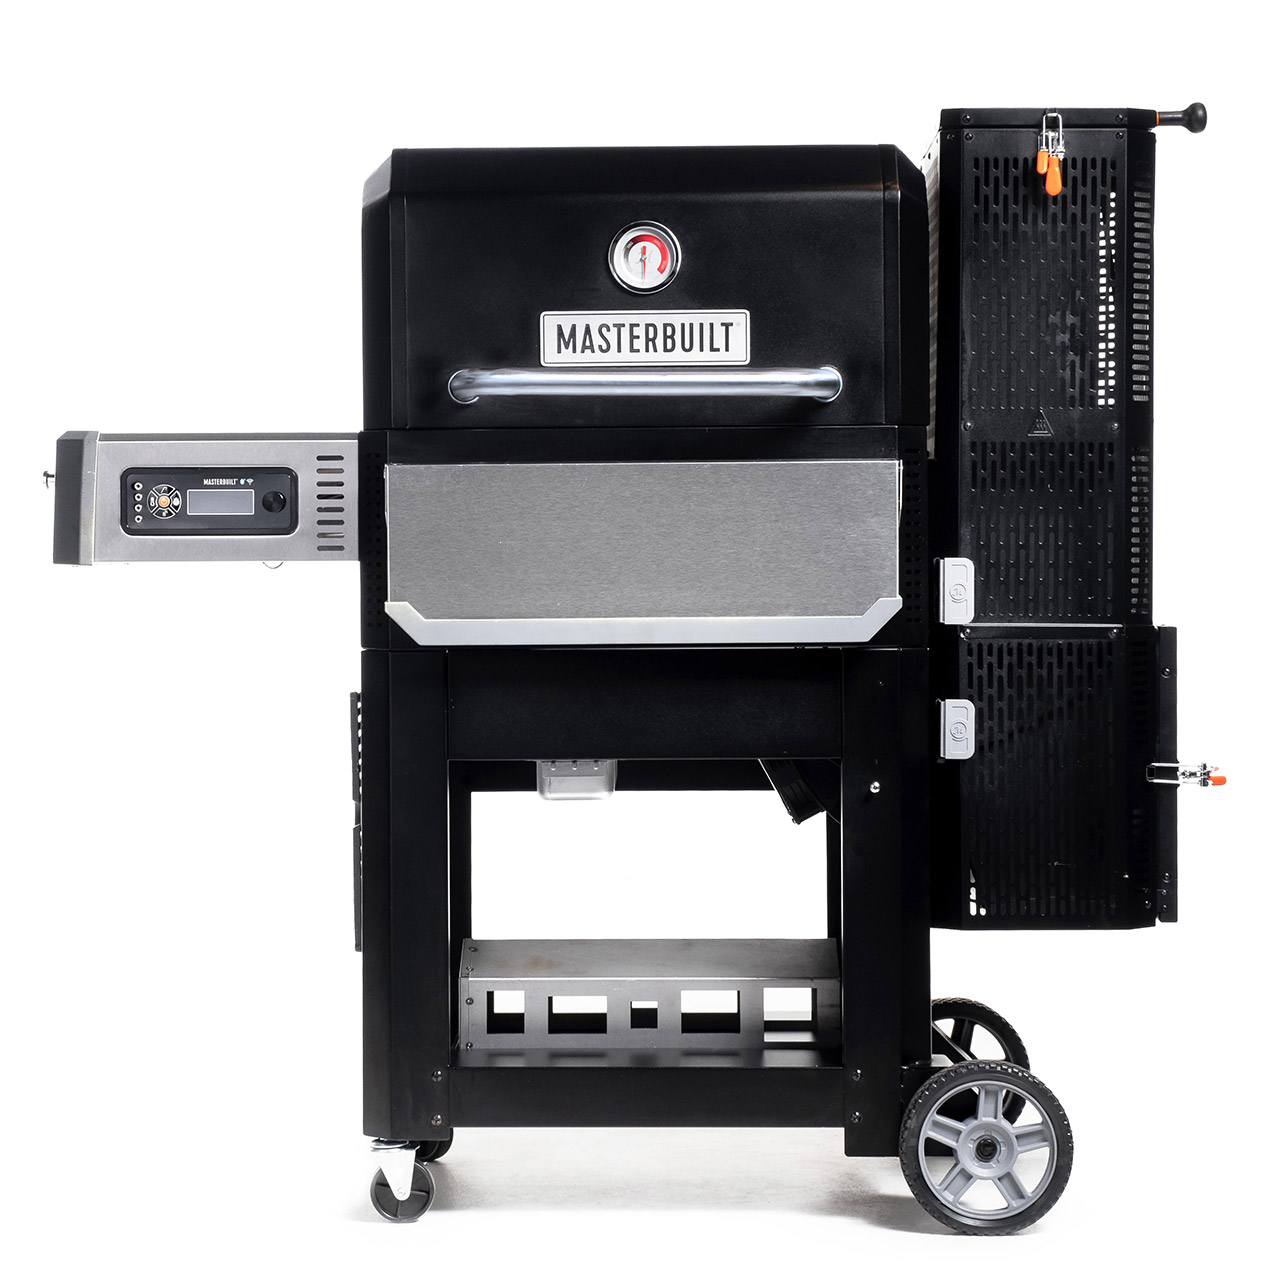 Masterbuilt - Gravity Series 800 Digital Charcoal Grill + Smoker + Griddle in Black